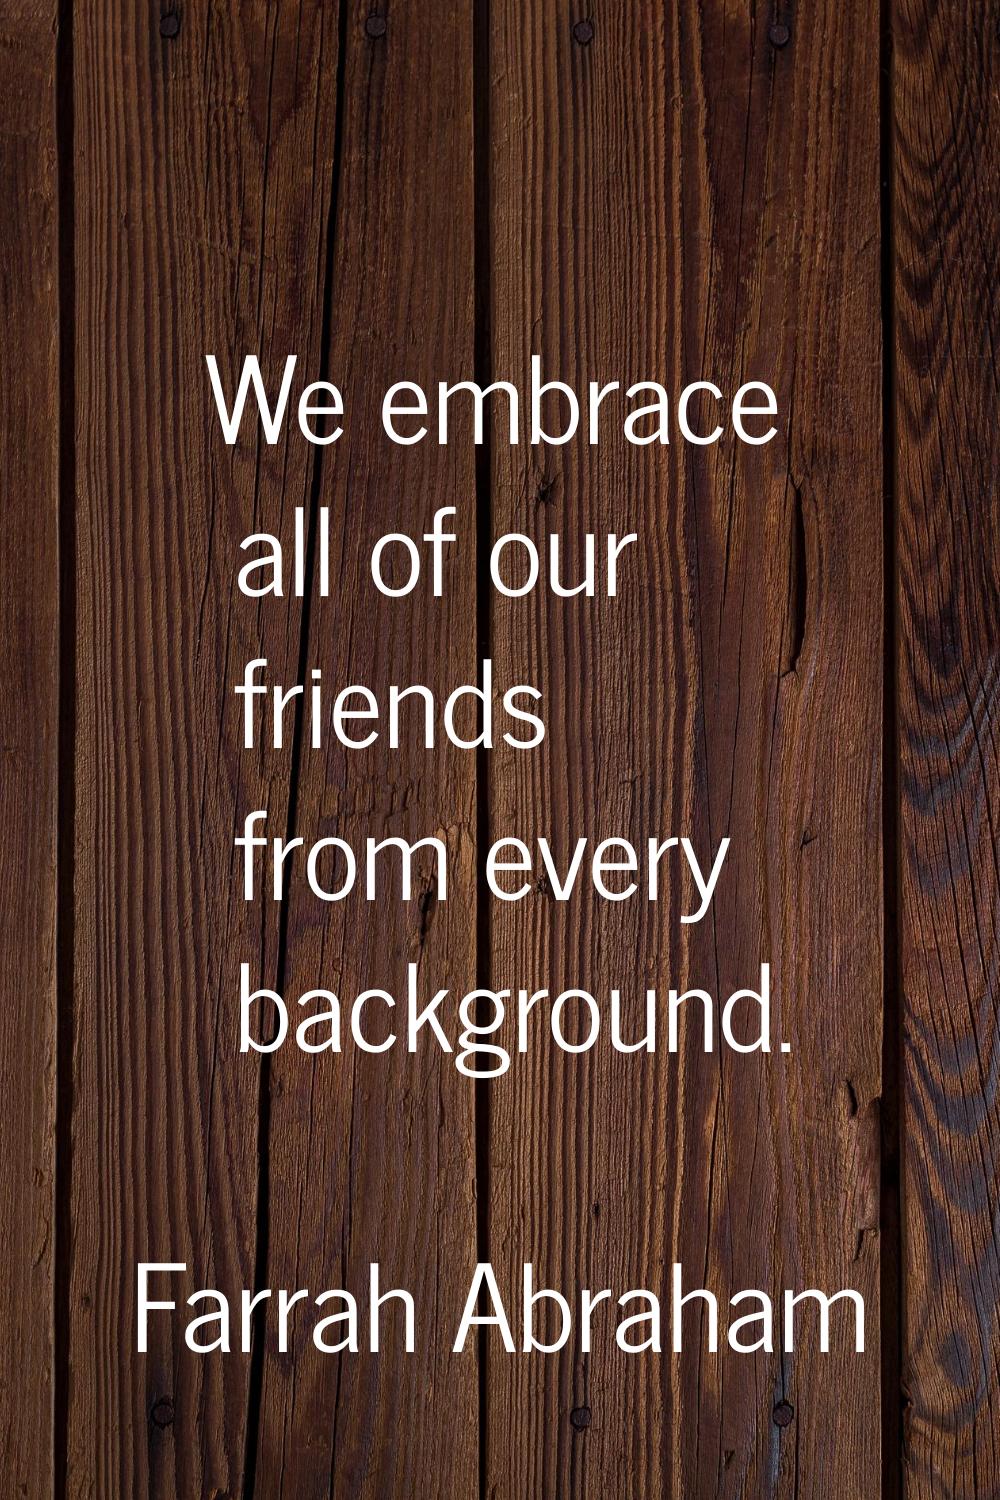 We embrace all of our friends from every background.